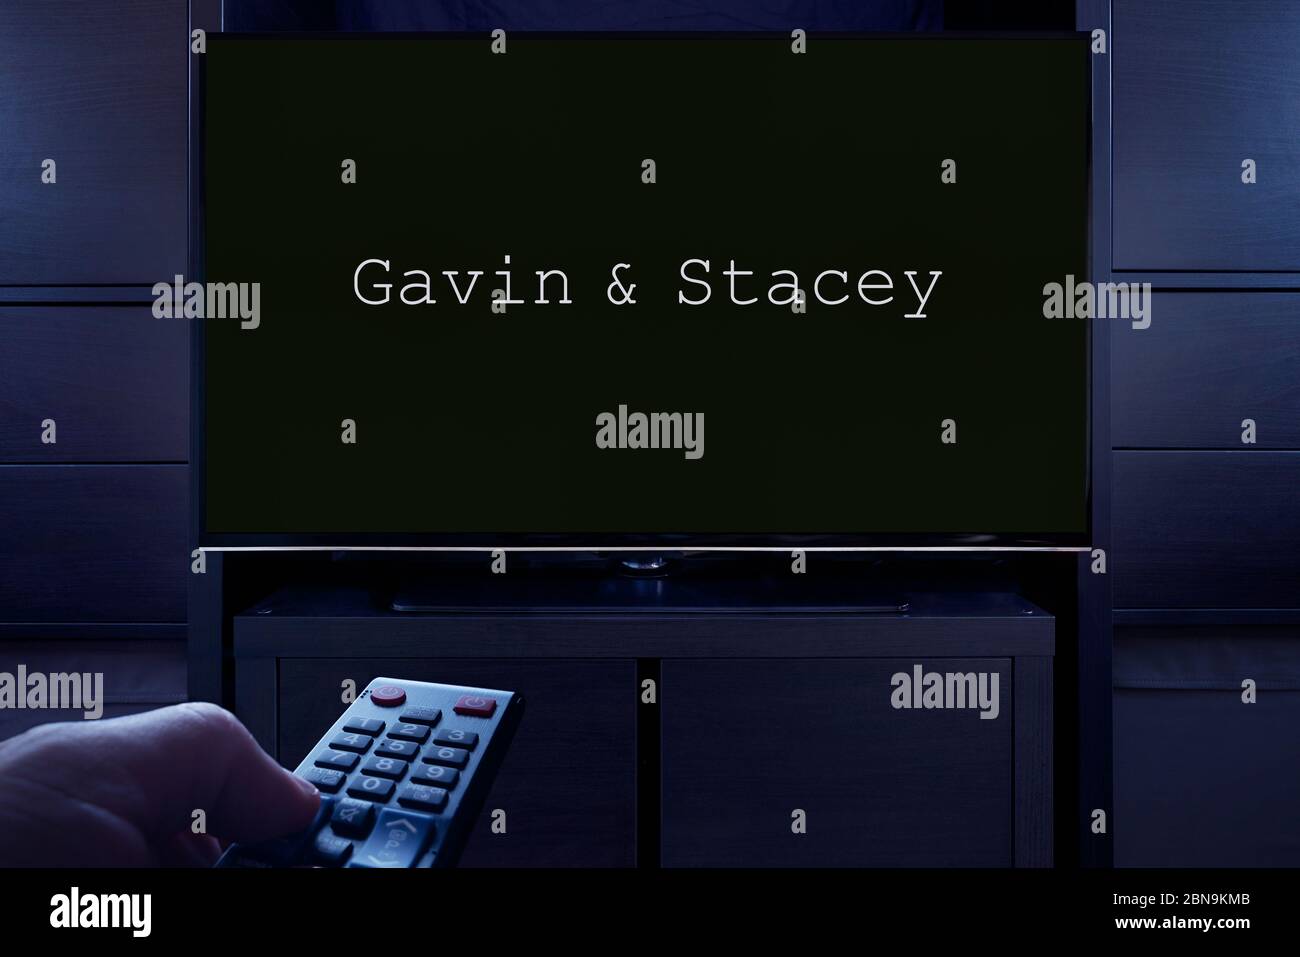 A man points a TV remote at the television which displays the Gavin & Stacey main title screen (Editorial use only). Stock Photo